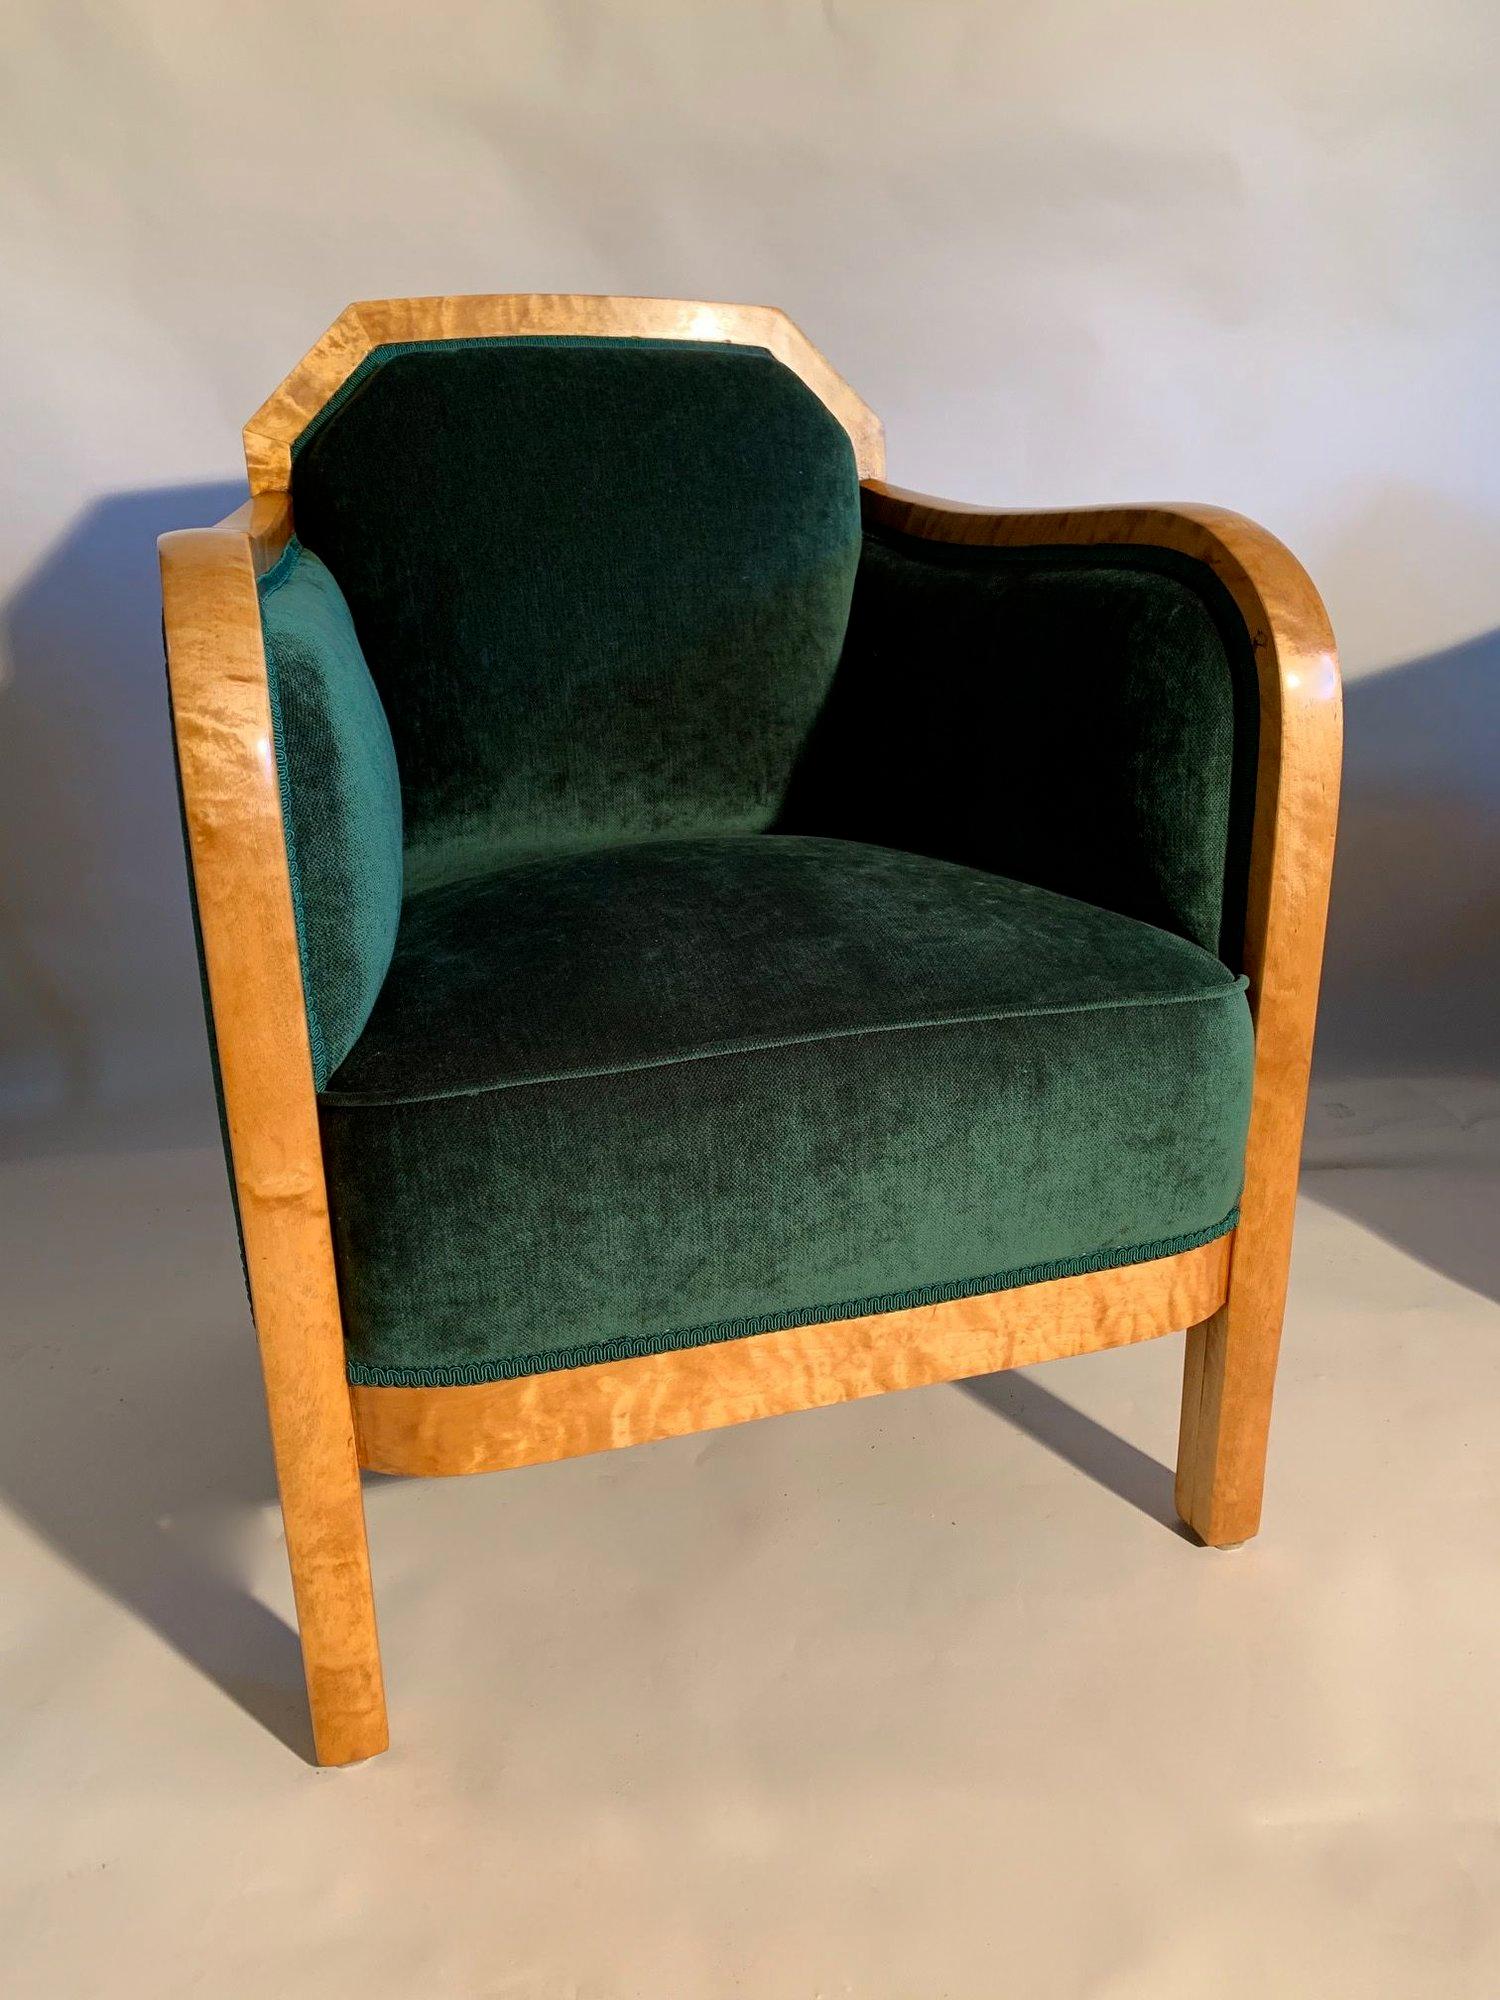 Pair of Swedish Art Deco flame birch lounge chairs.
These chairs have been re upholstered in a beautiful emerald green chenille fabric which is a perfect compliment to the timber.
The seats are fully sprung and very comfortable.
  